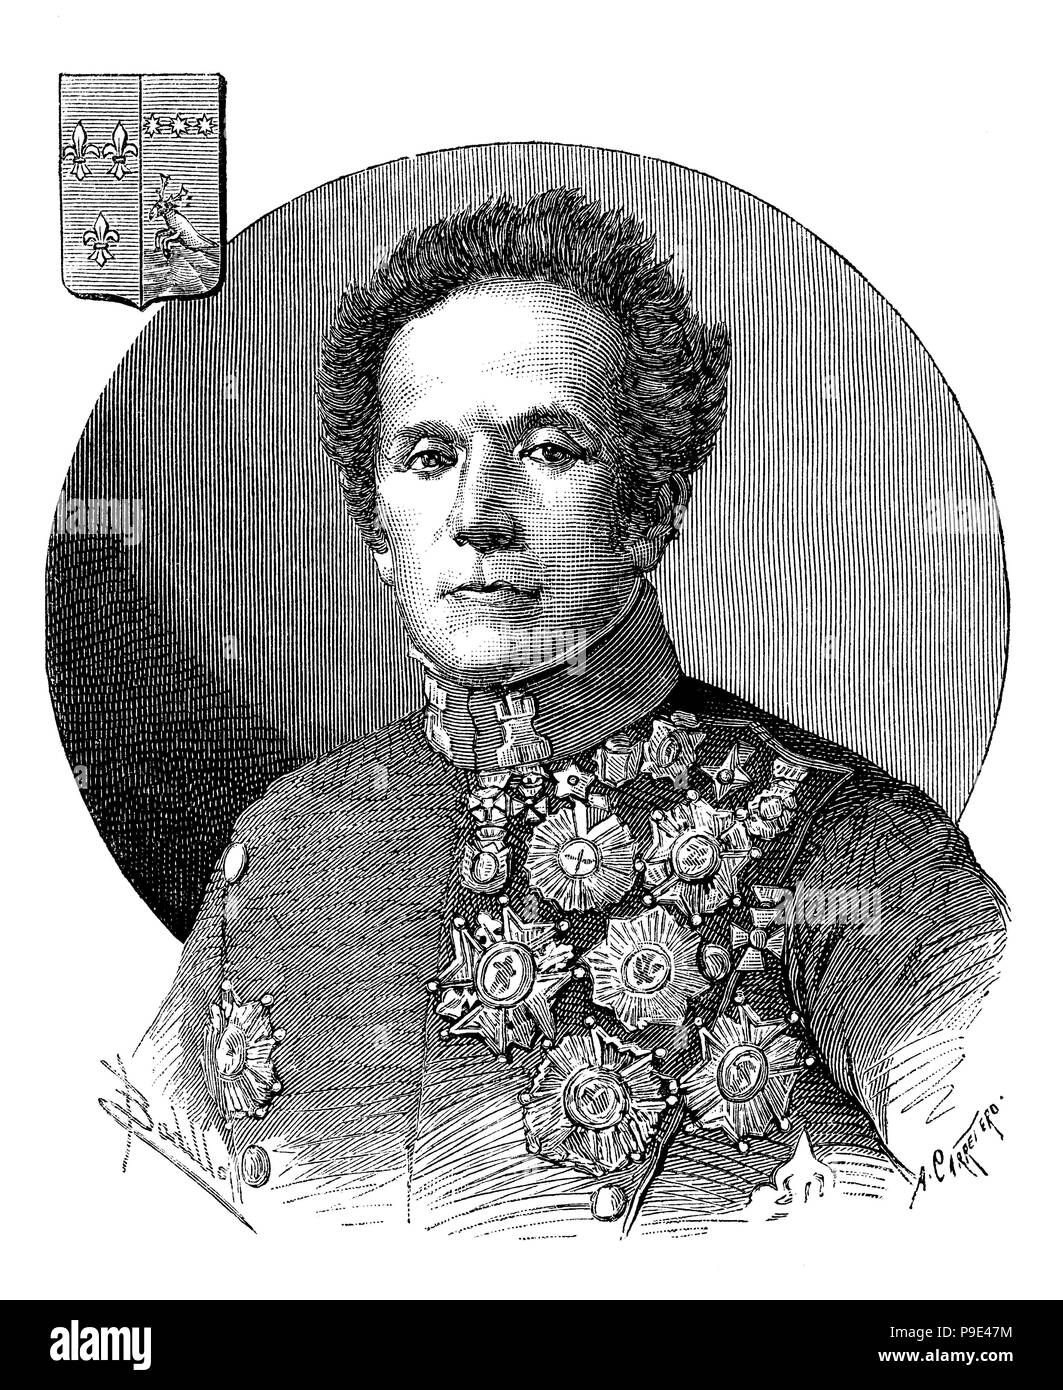 Antonio Remón Zarco del Valle and Huet (1785-1866), military officer, engineer and Spanish writer. Stock Photo